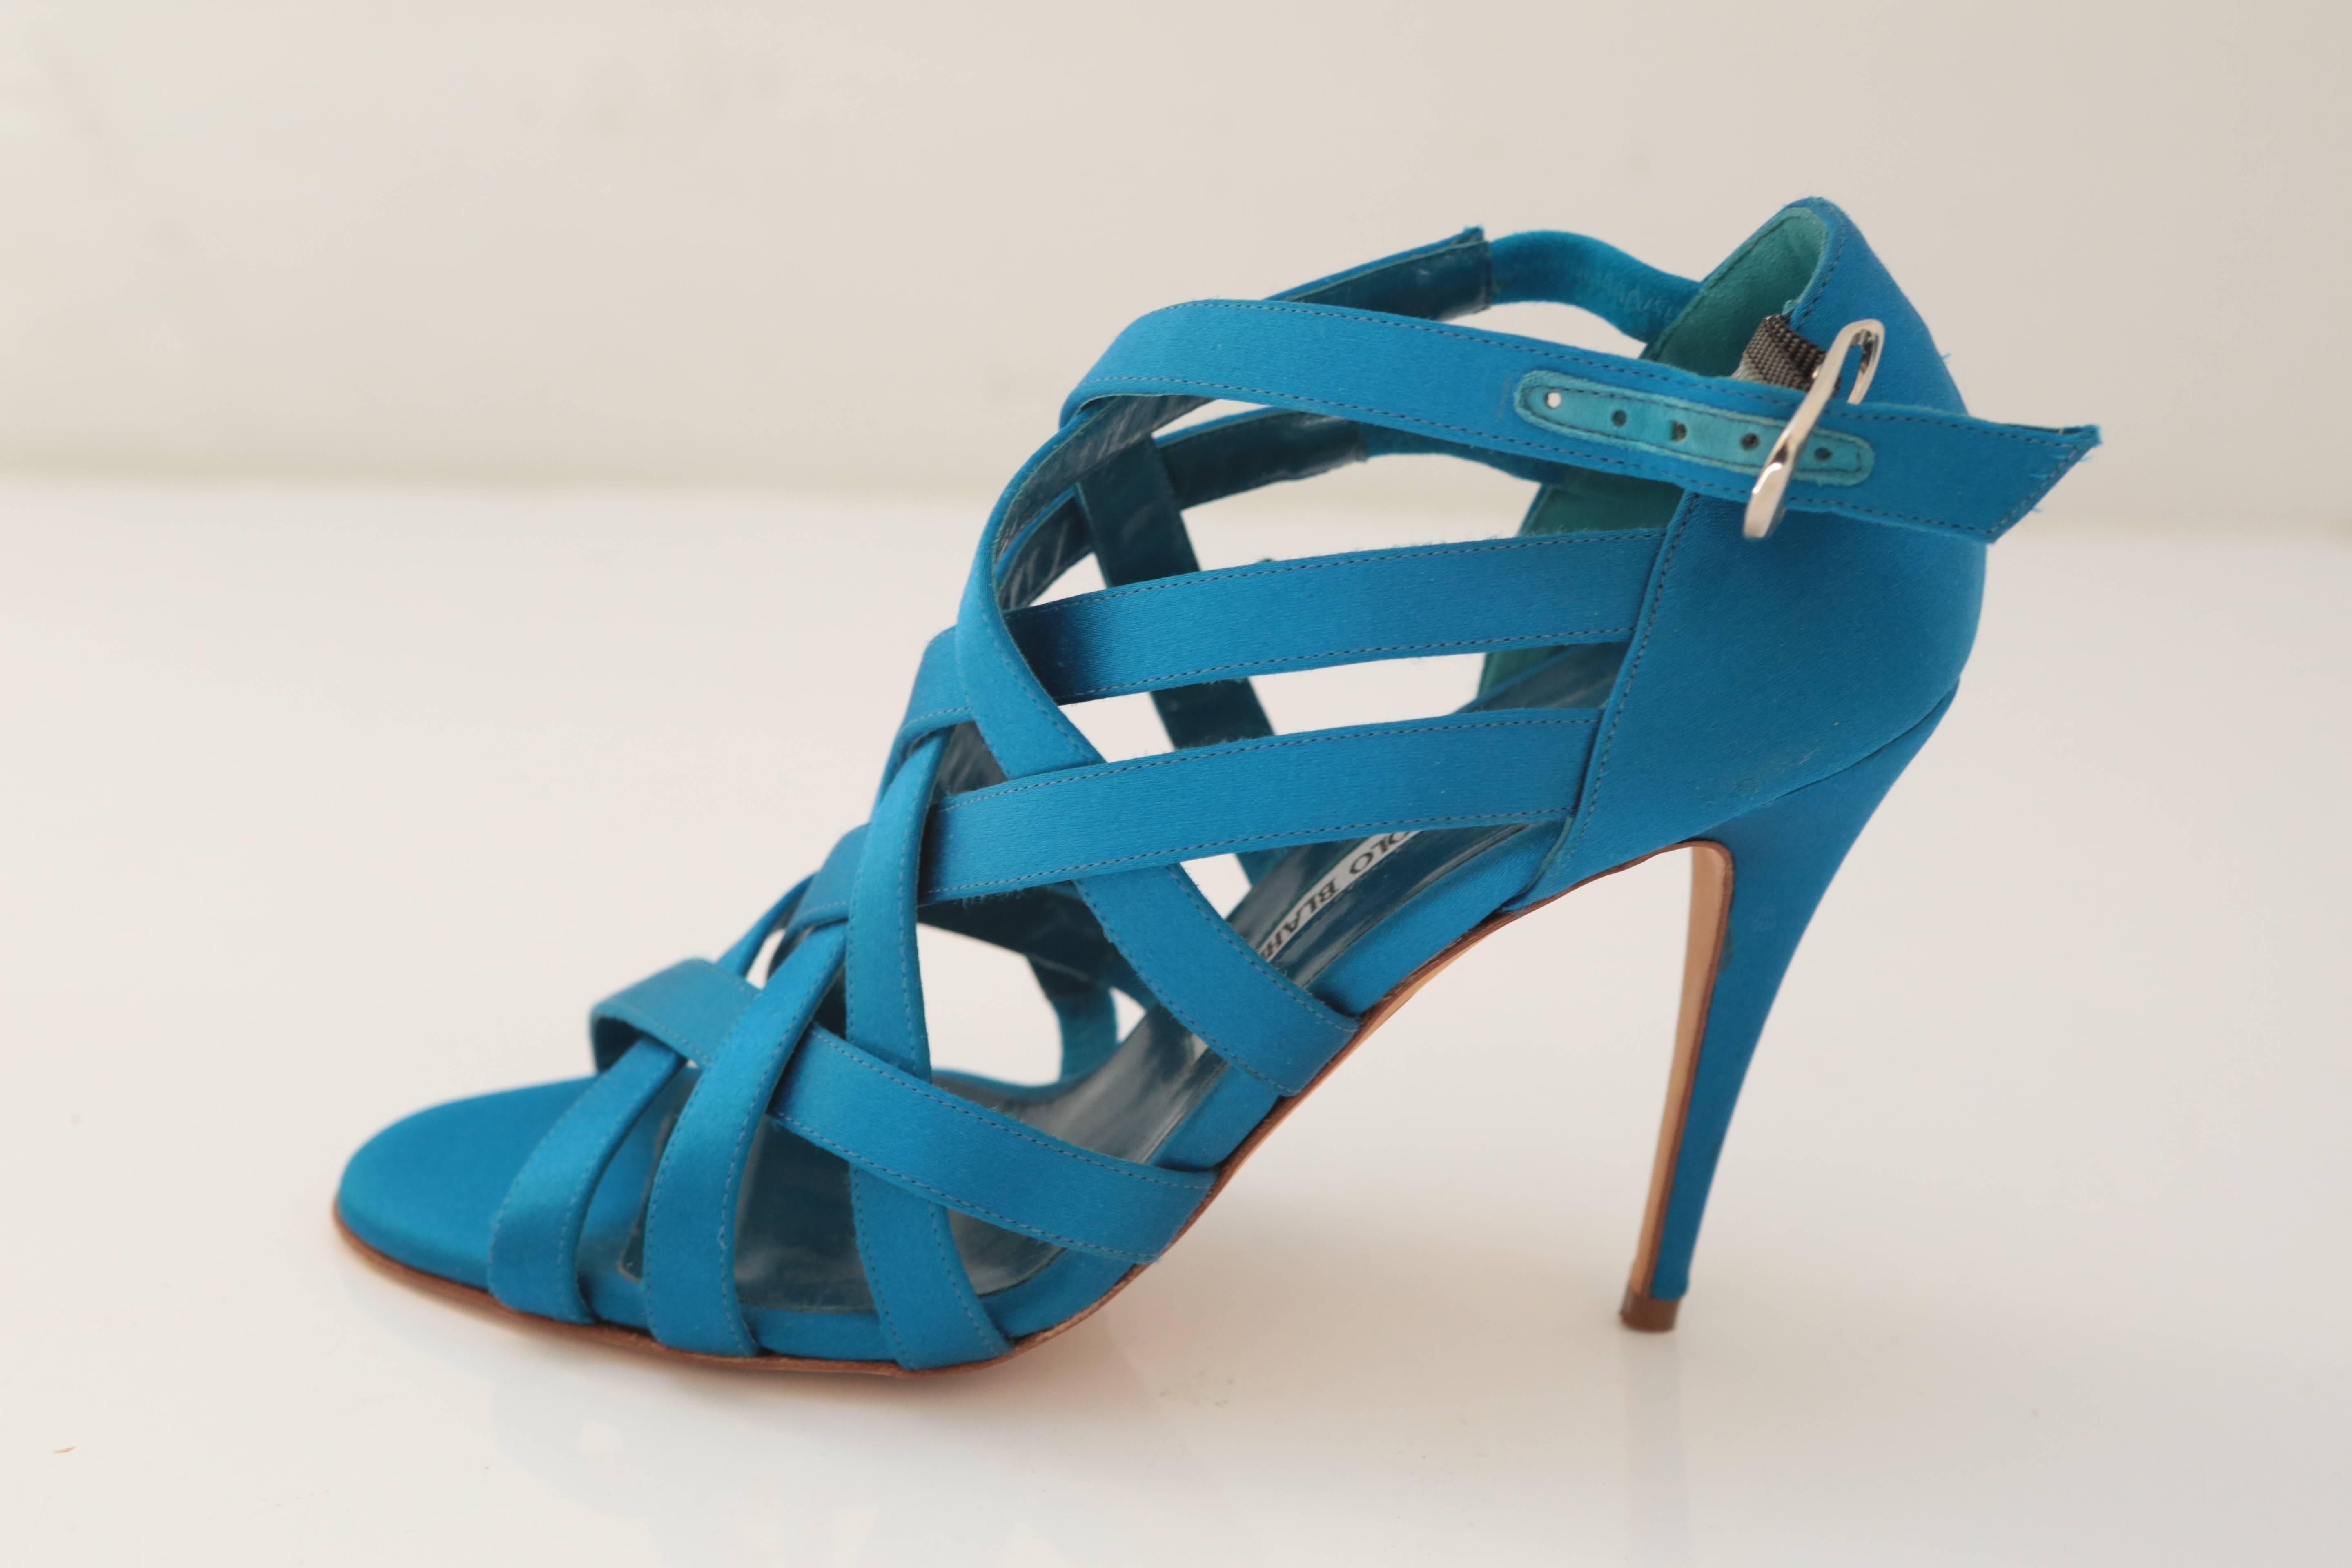 Strappy criss-cross heel in satin is the perfect shade of teal to dress down for daytime or jazz up for evening. A covetable classic from Manolo Blahnik.